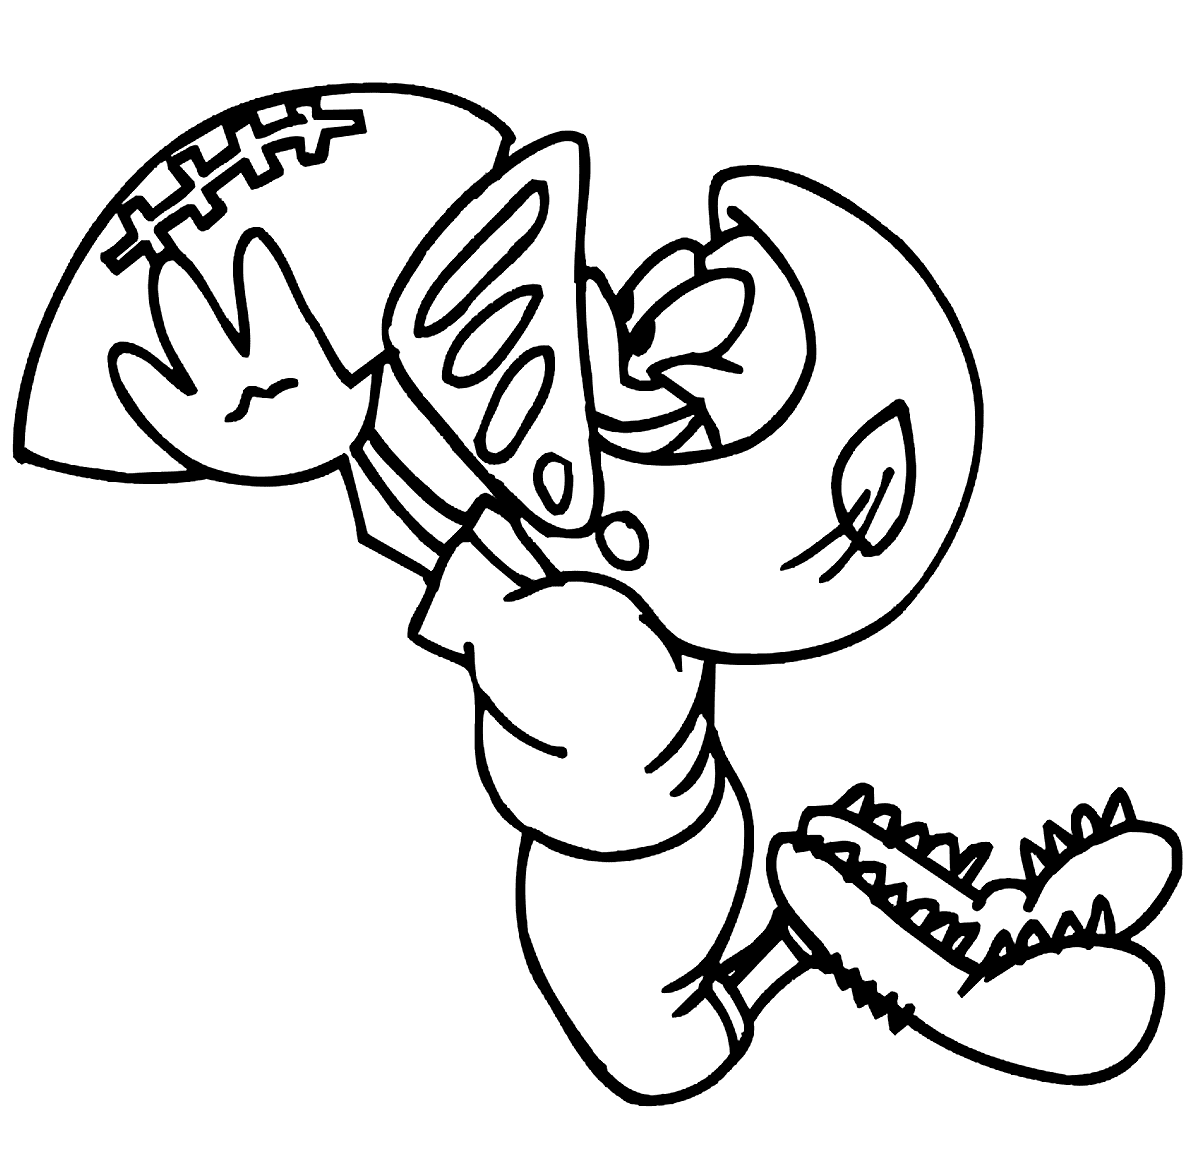 Jumping Football Player Coloring Page